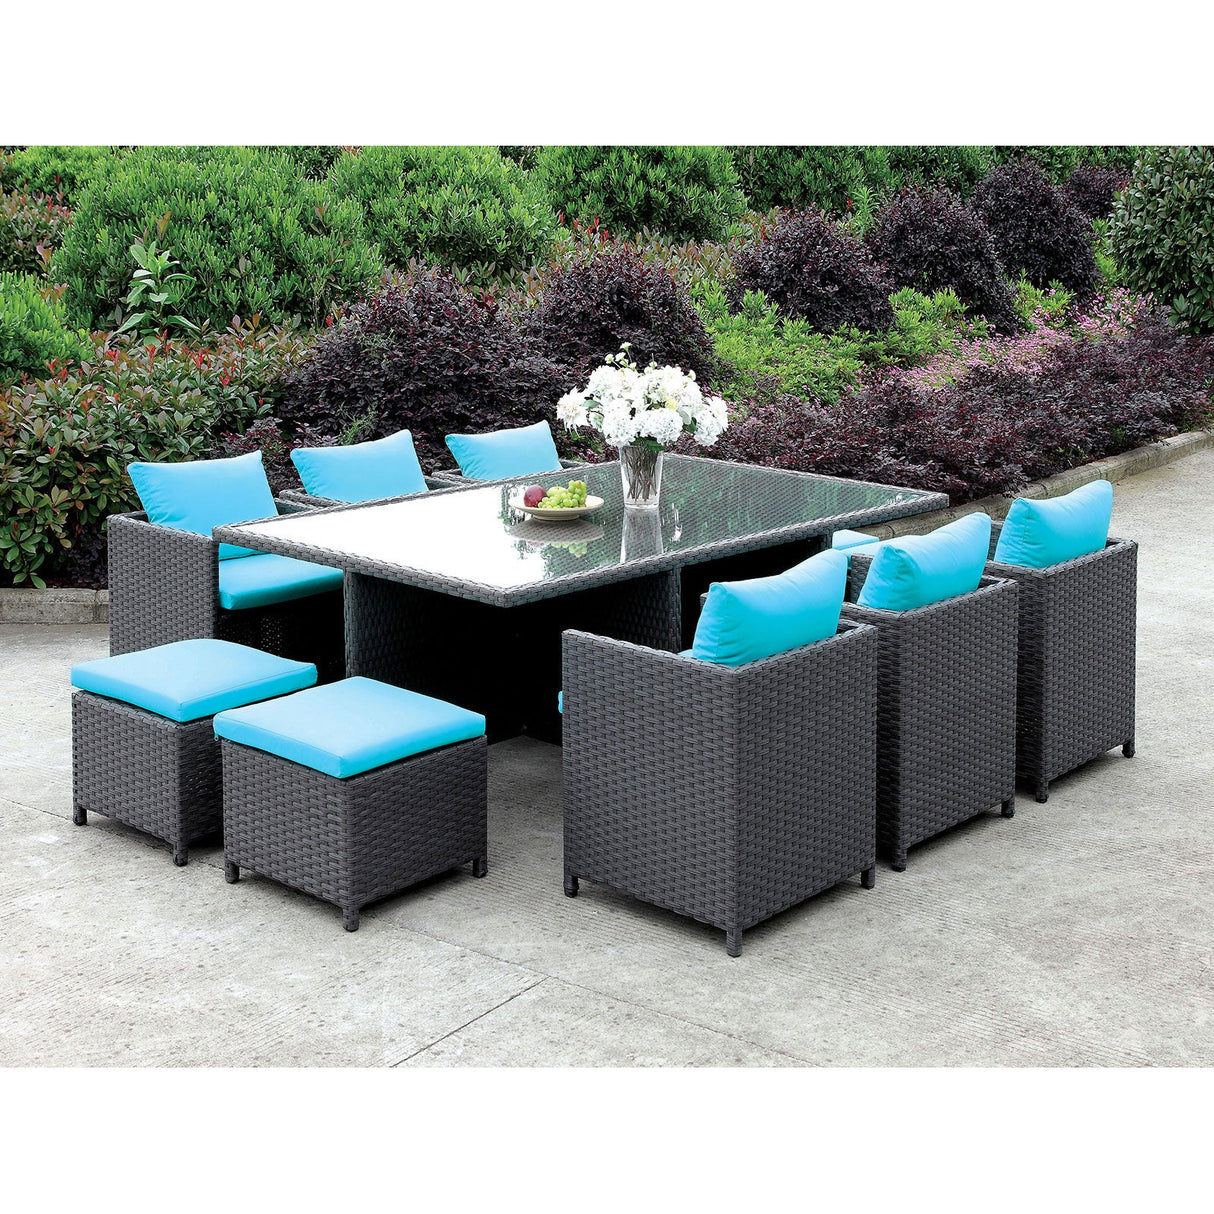 11 Pc. Patio Dining Table Set